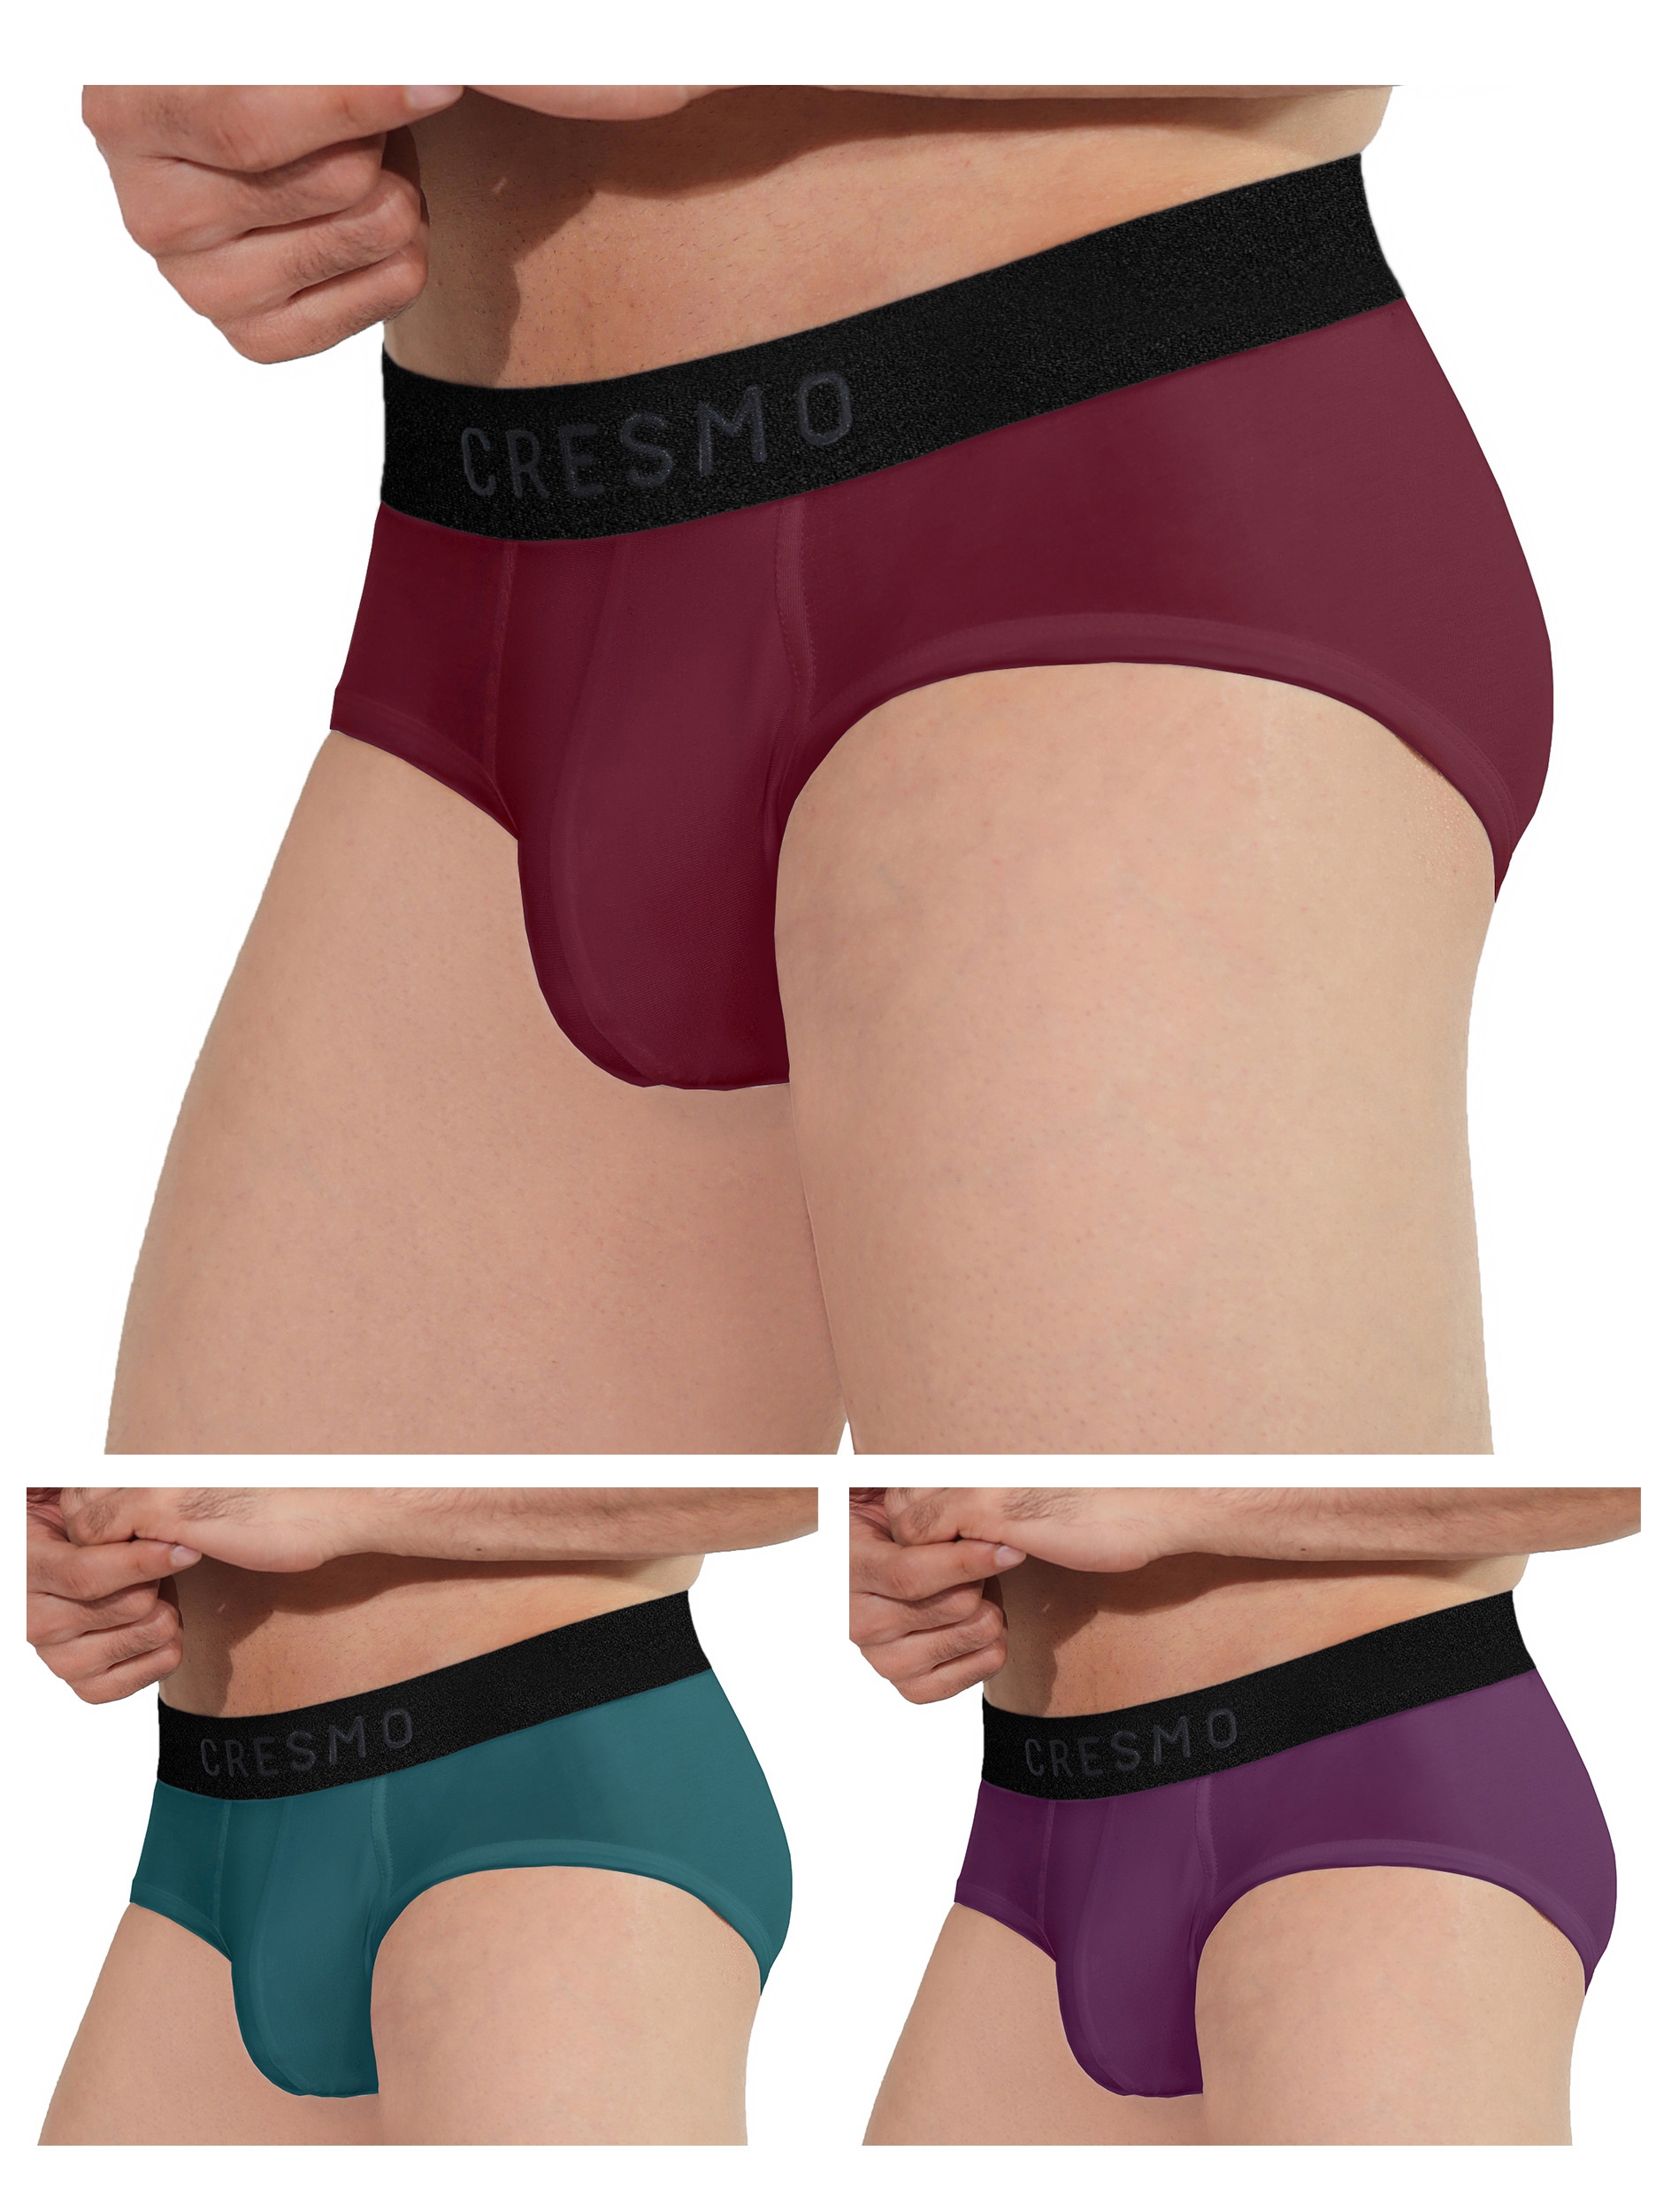 CRESMO | CRESMO Men's Microbial Micro Modal Underwear Breathable Ultra Soft Comfort Lightweight Brief (Pack of 3)